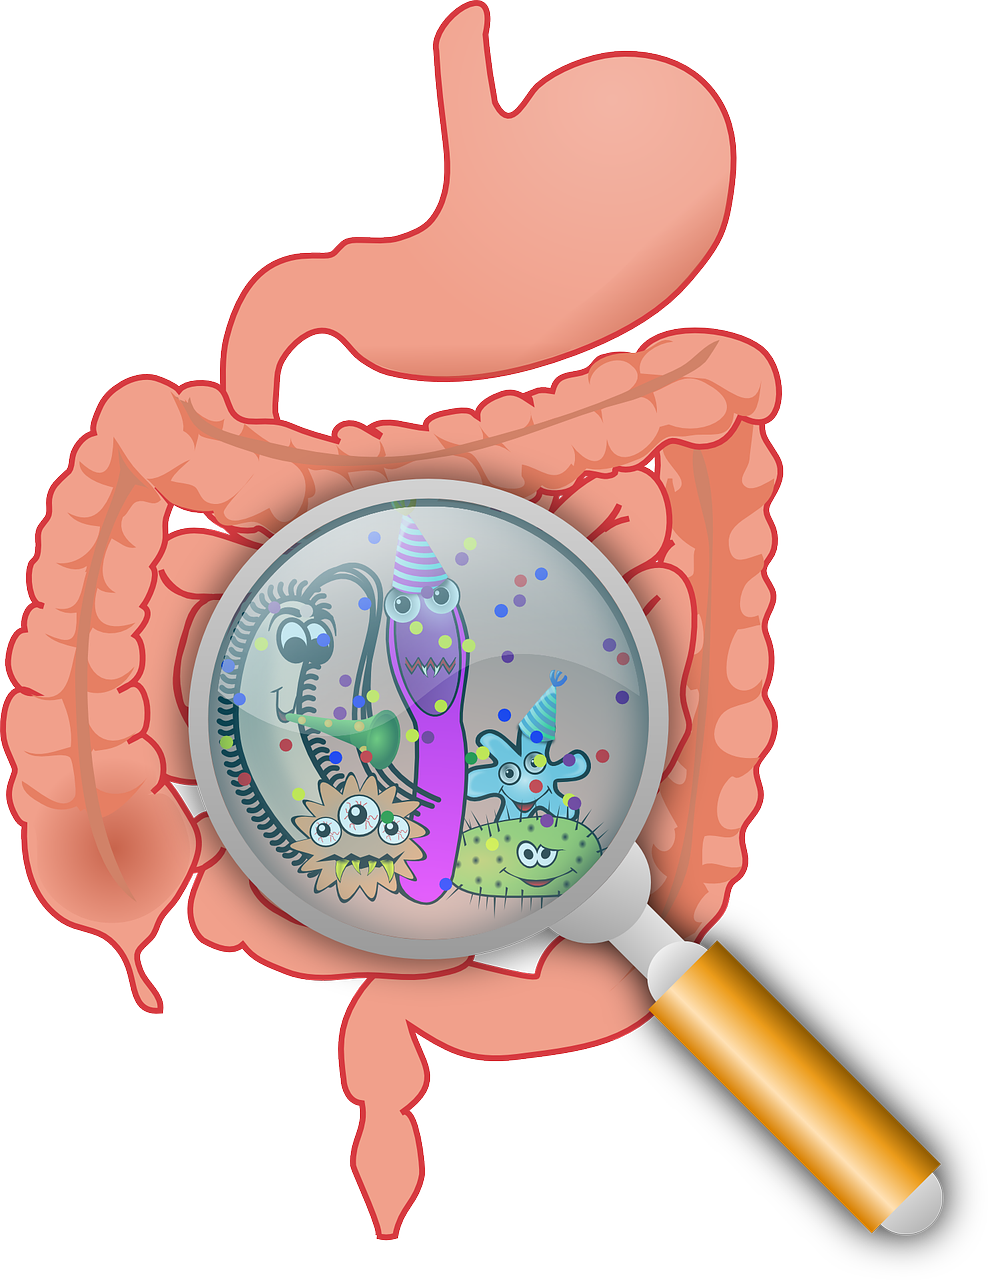 Illustration of bacteria under a magnifying glass in the bowels